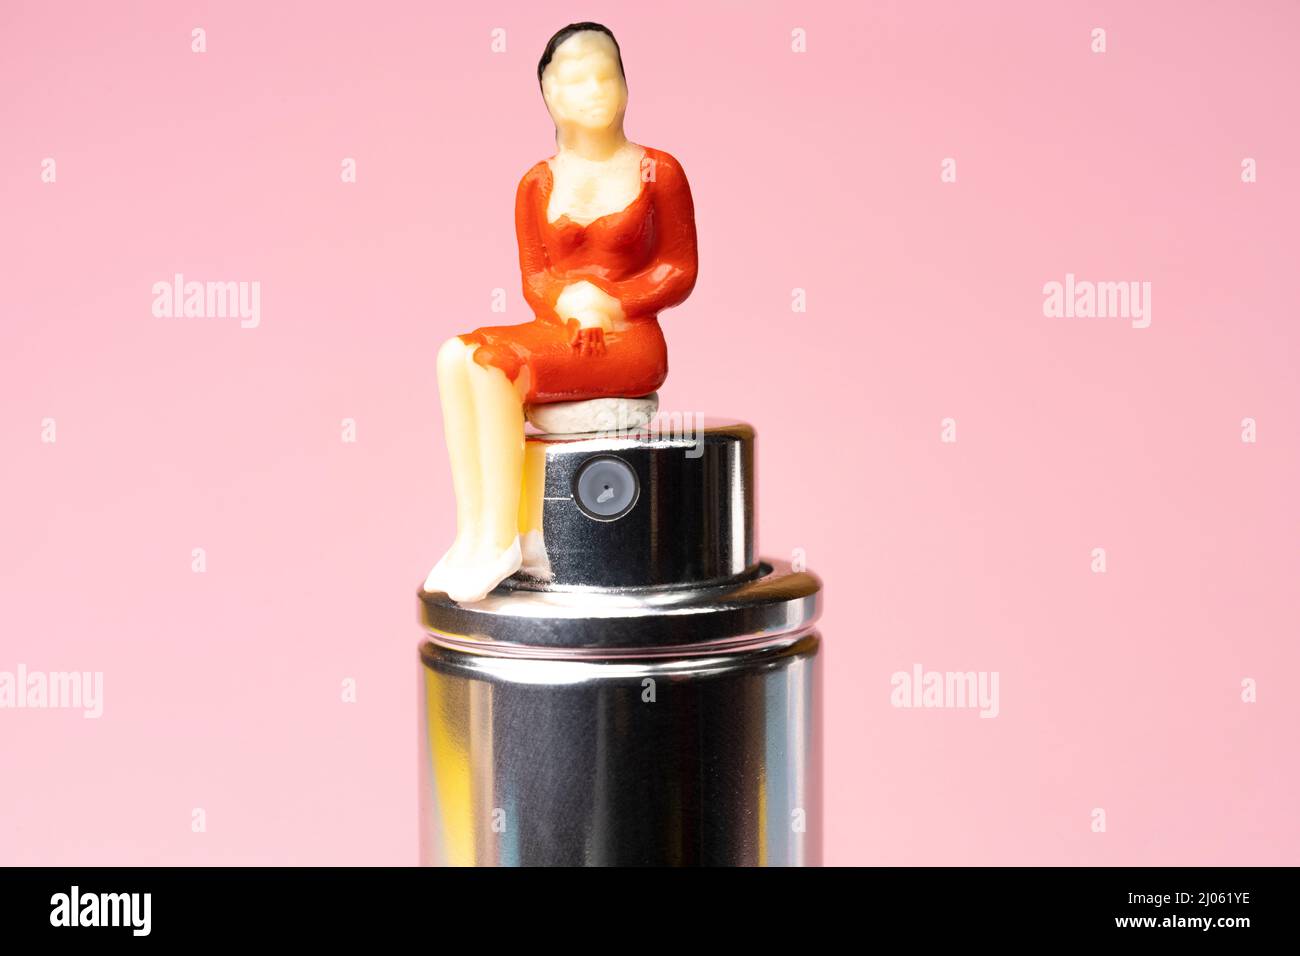 a statuette of a woman sitting on a perfume bottle Stock Photo